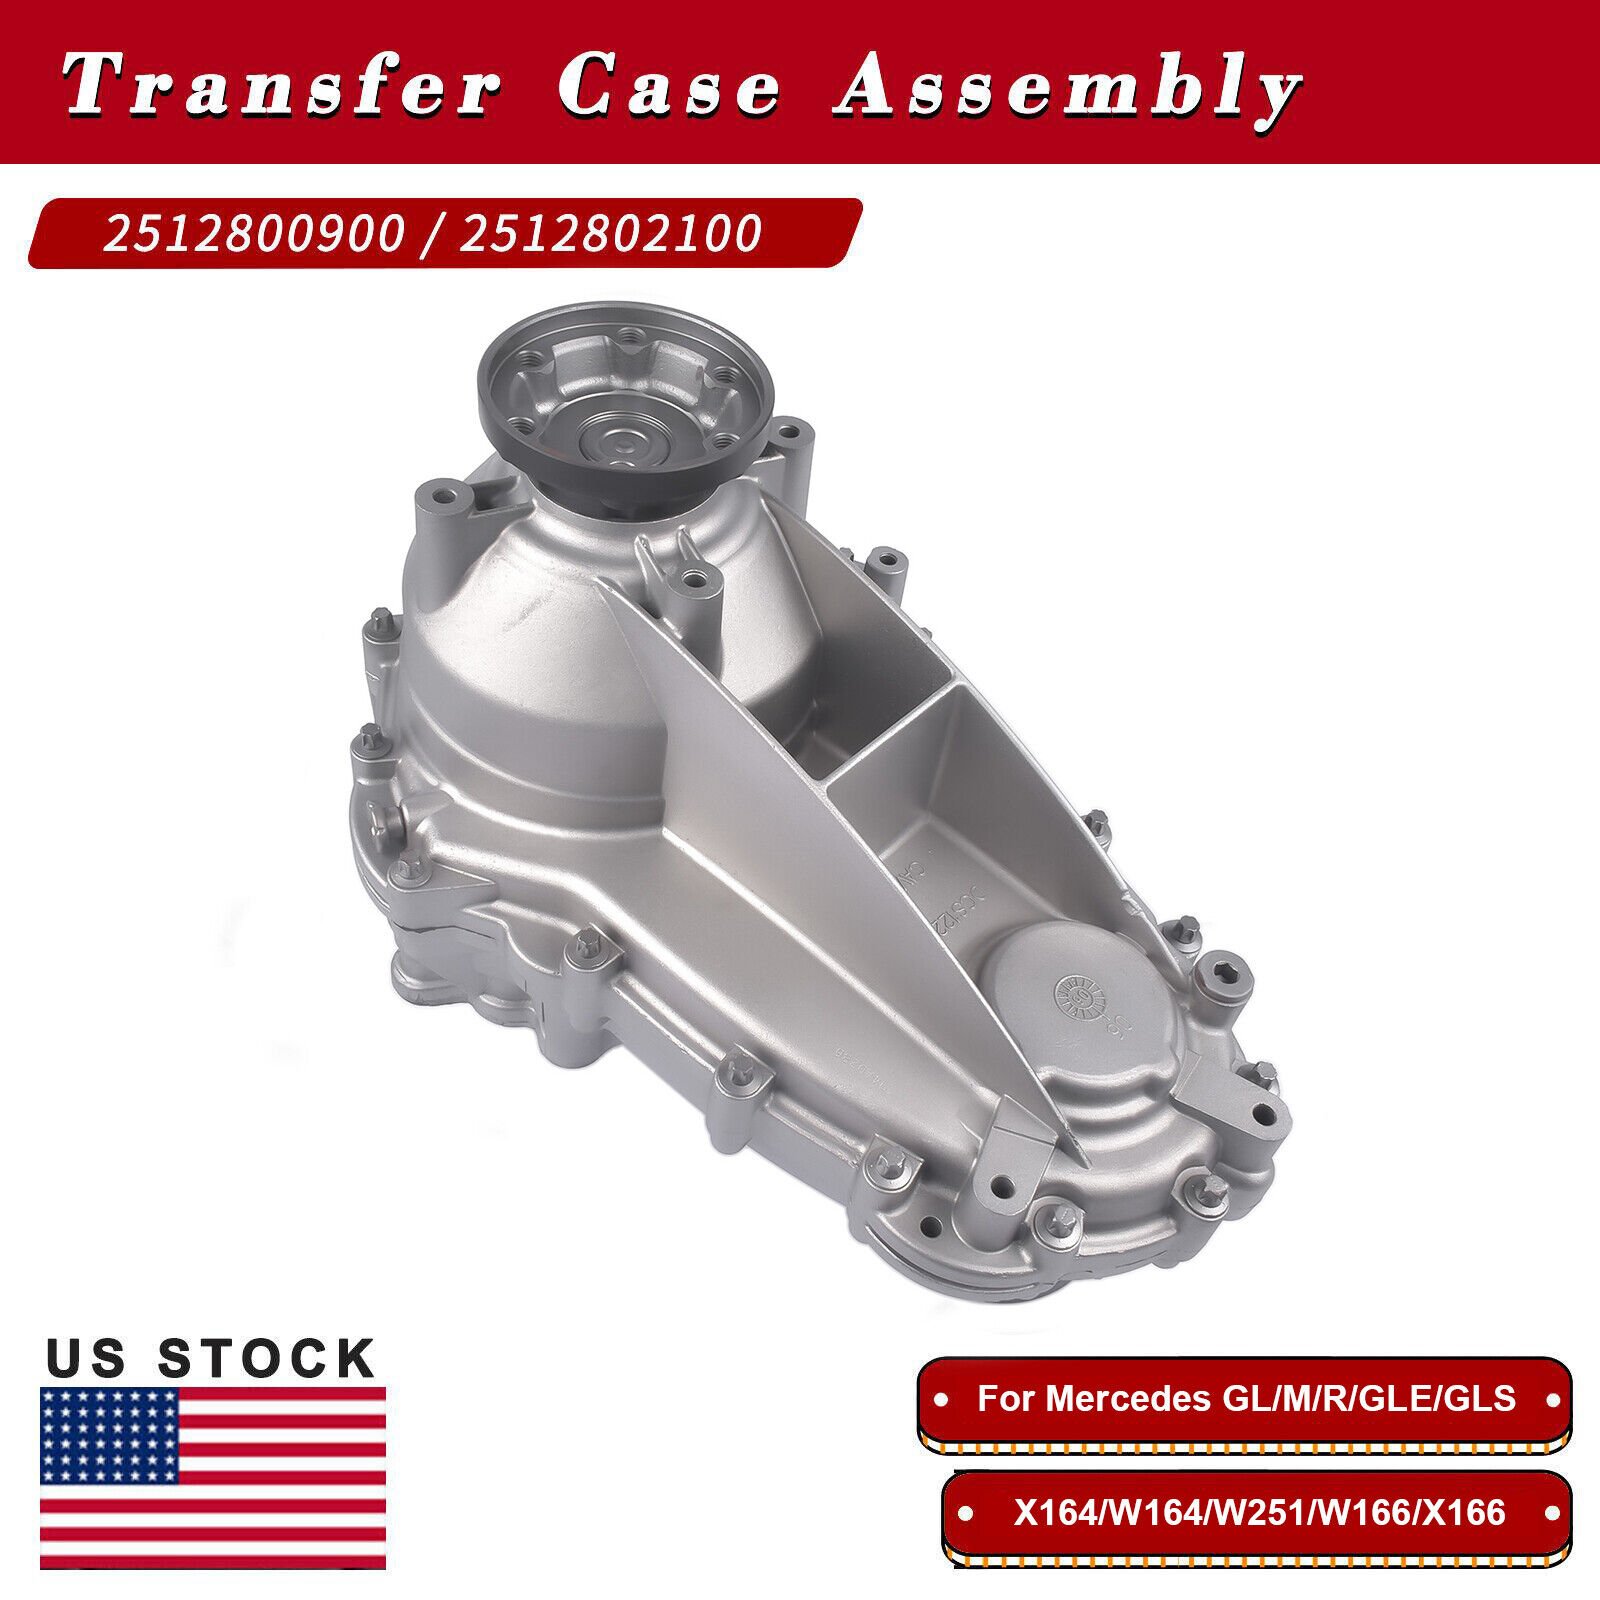 New Transfer Case Assembly 2512800900 for Mercedes-Benz GL-Class GL450 2007-2016